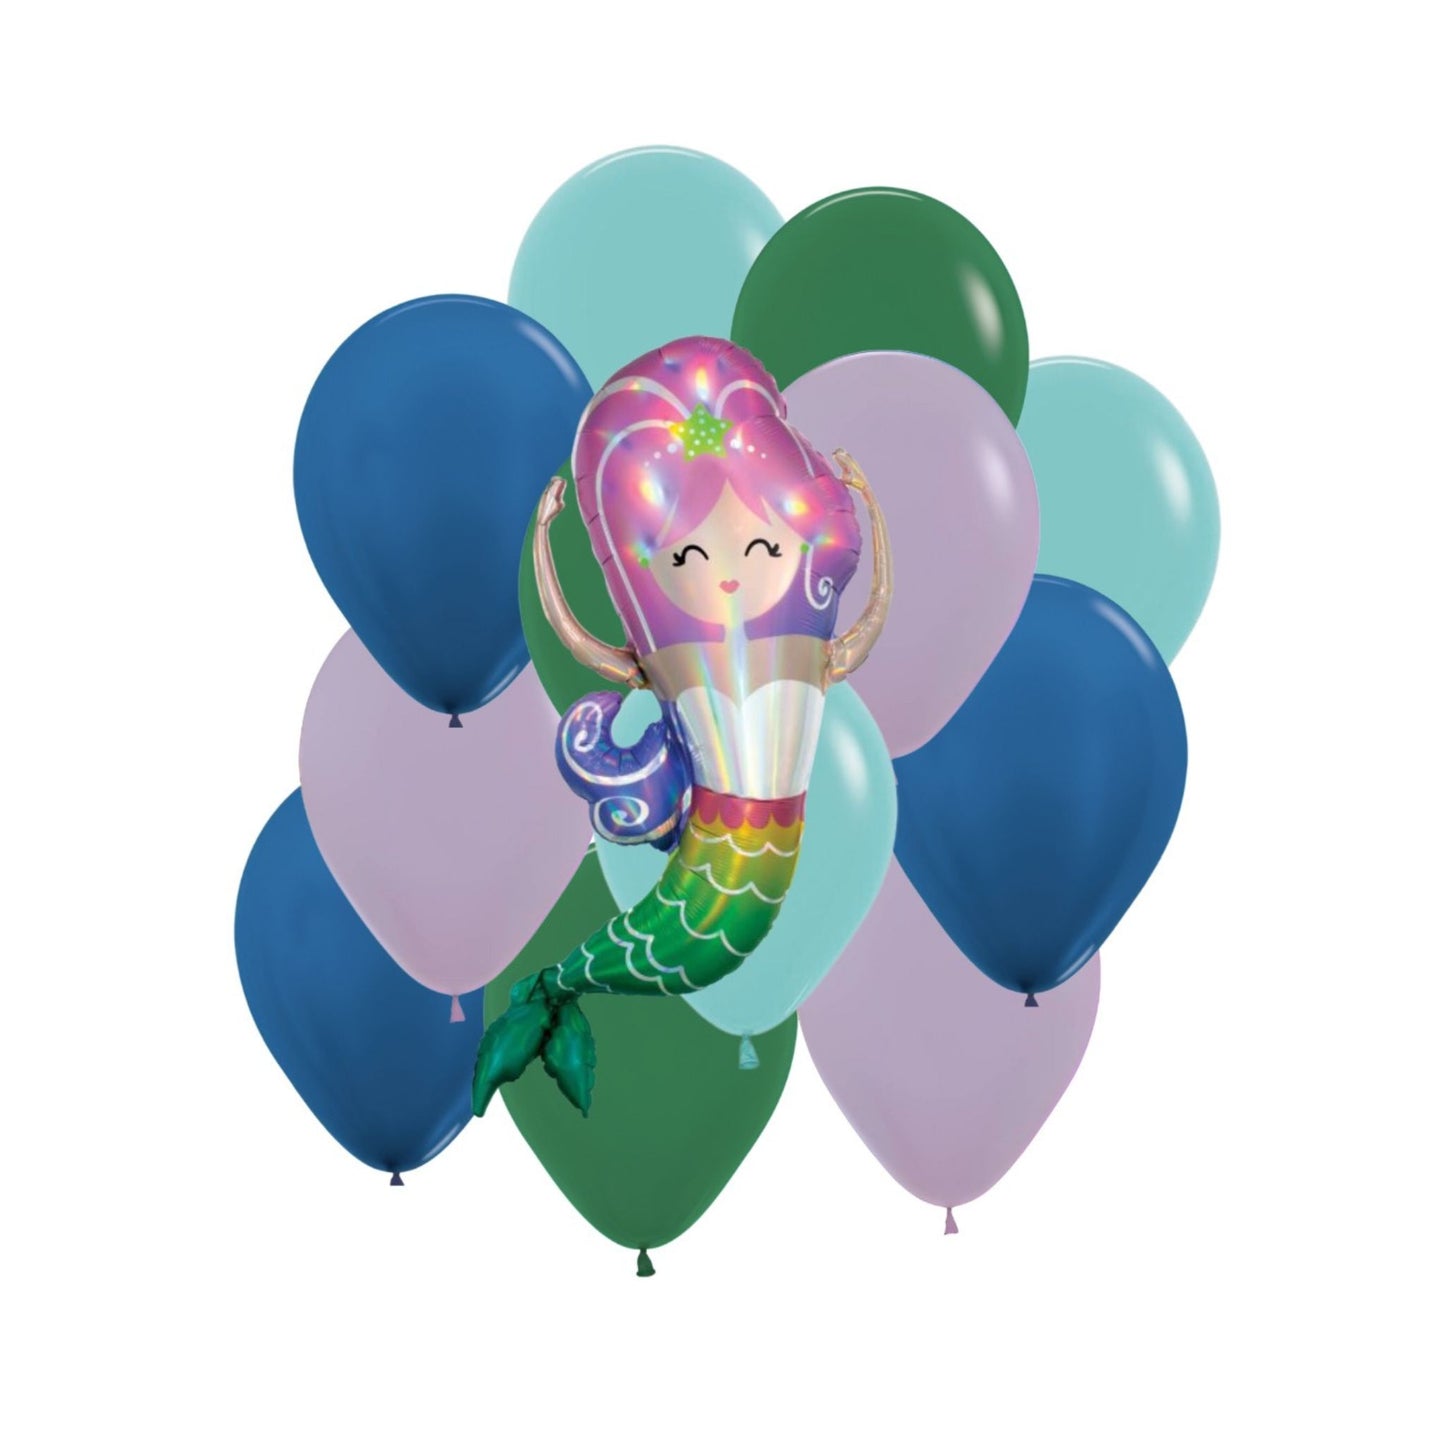 Mermaid Balloon Bouquet containing giant Mermaid Balloon and 12 x 30cm standard size balloons in lilac, forest green, aquamarine and royal blue.